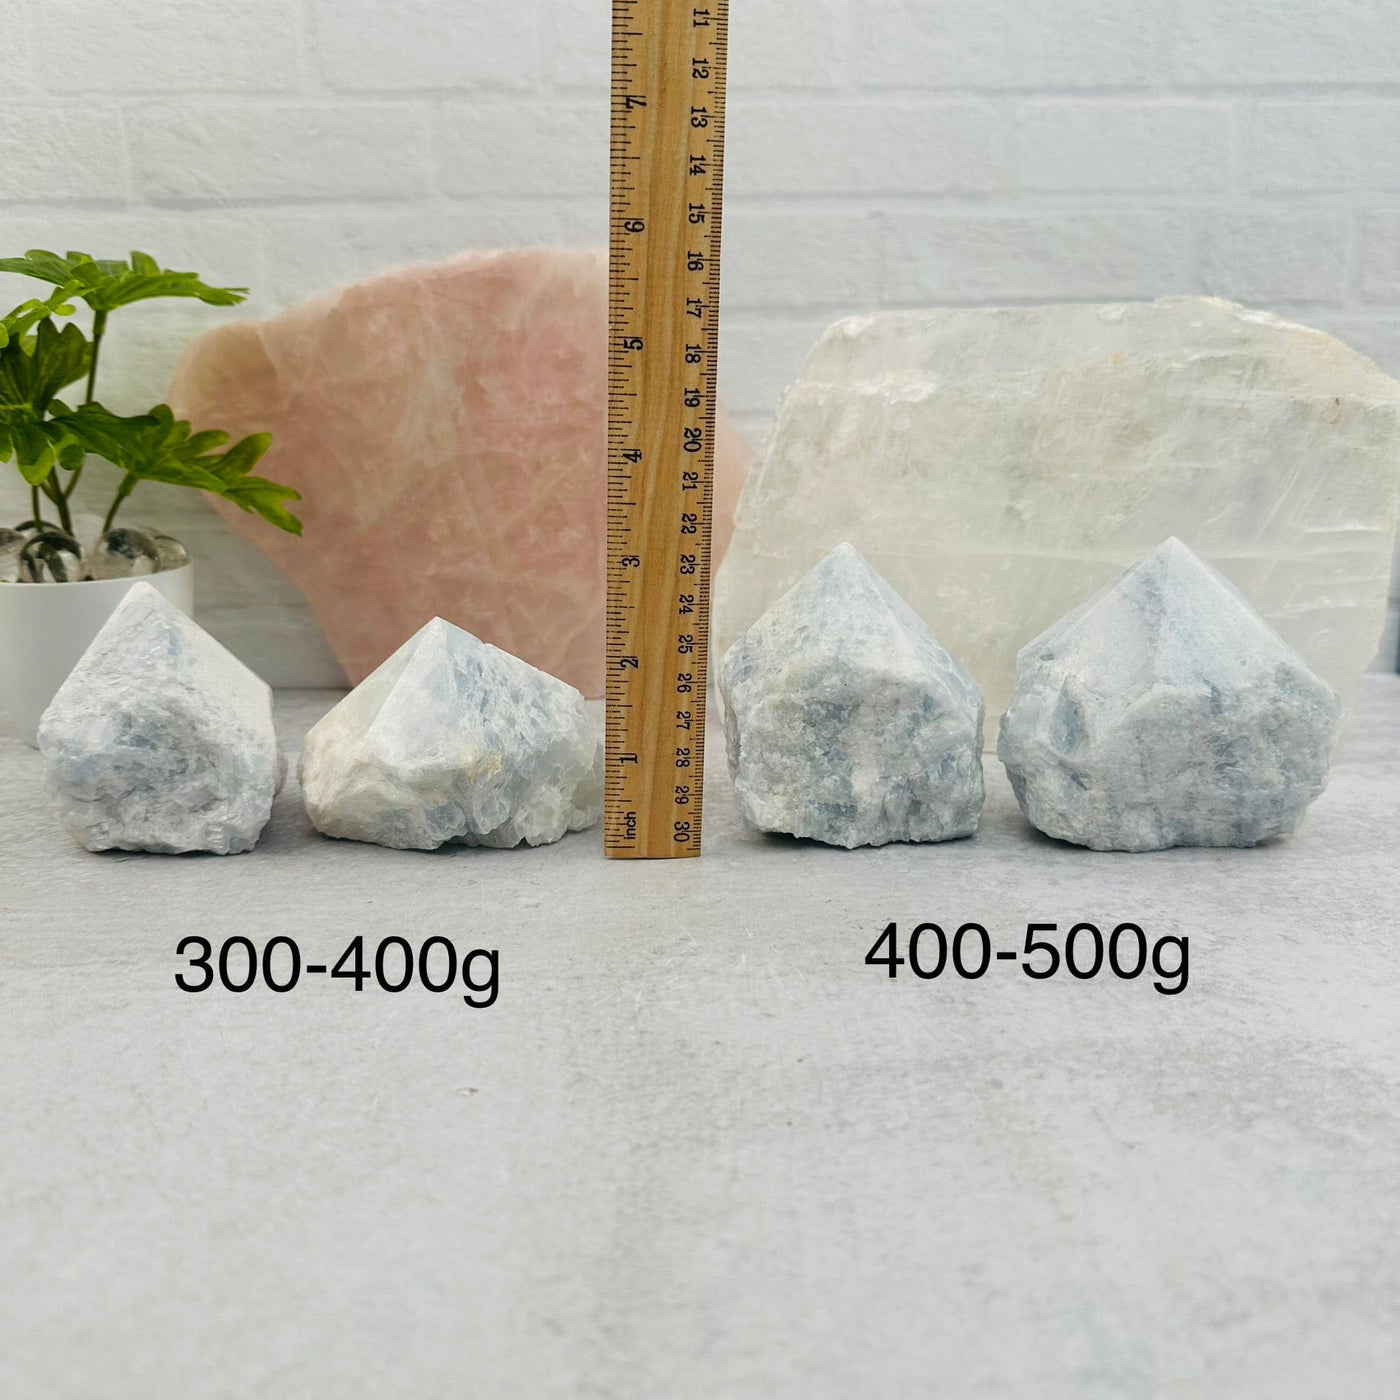 Blue Calcite Semi-Polished Points - By Weight next to a ruler for size reference 